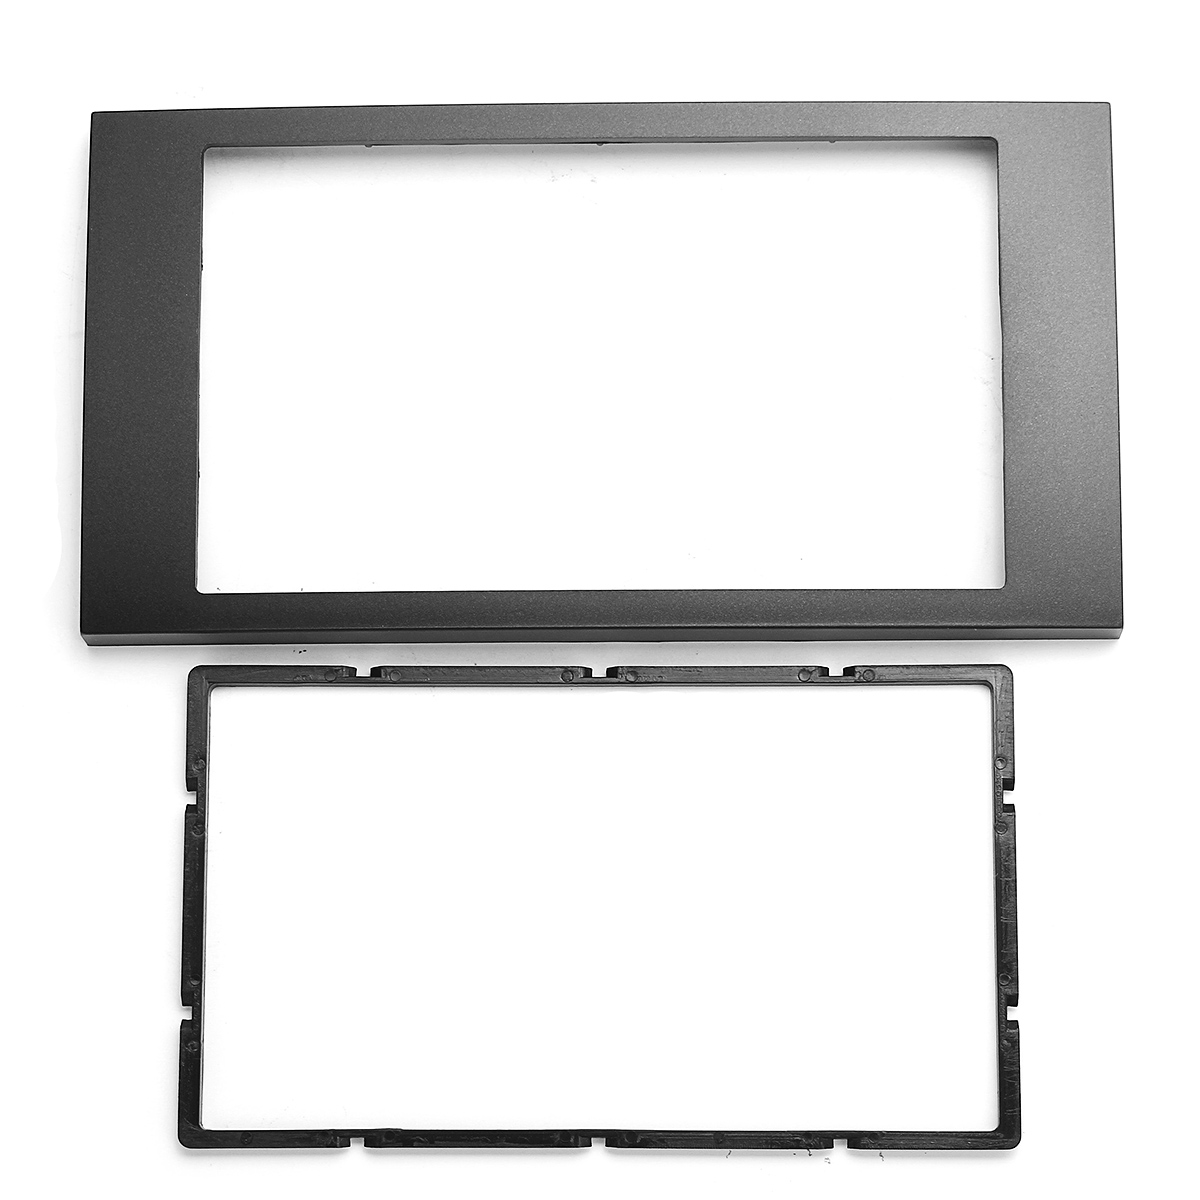 

2 Din Car Stereo Radio Multimedia Player Fascia Panel for For Ford Focus II C-Max S-Max Fusion Transit Fiesta III